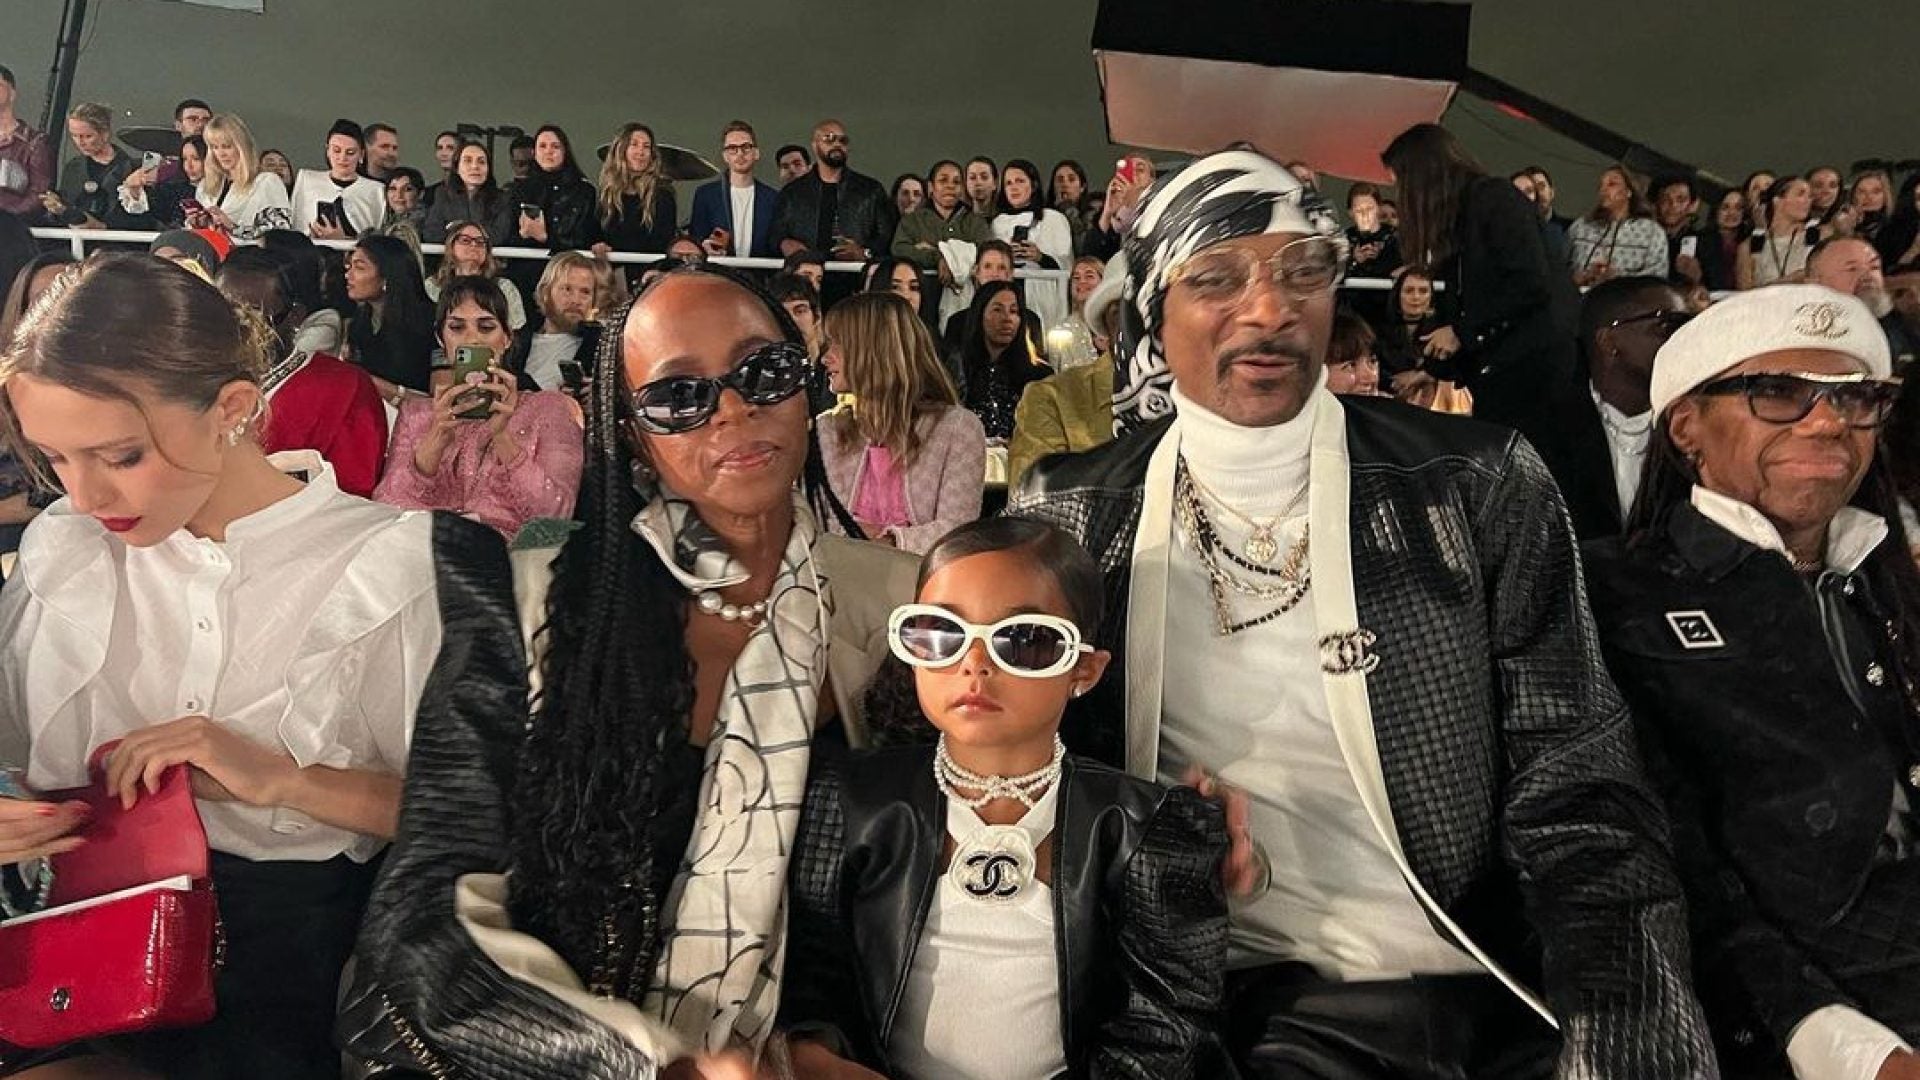 Snoop Dogg Attended His First Fashion Show With Wife Shante And Their Stylish Granddaughter As His Guests